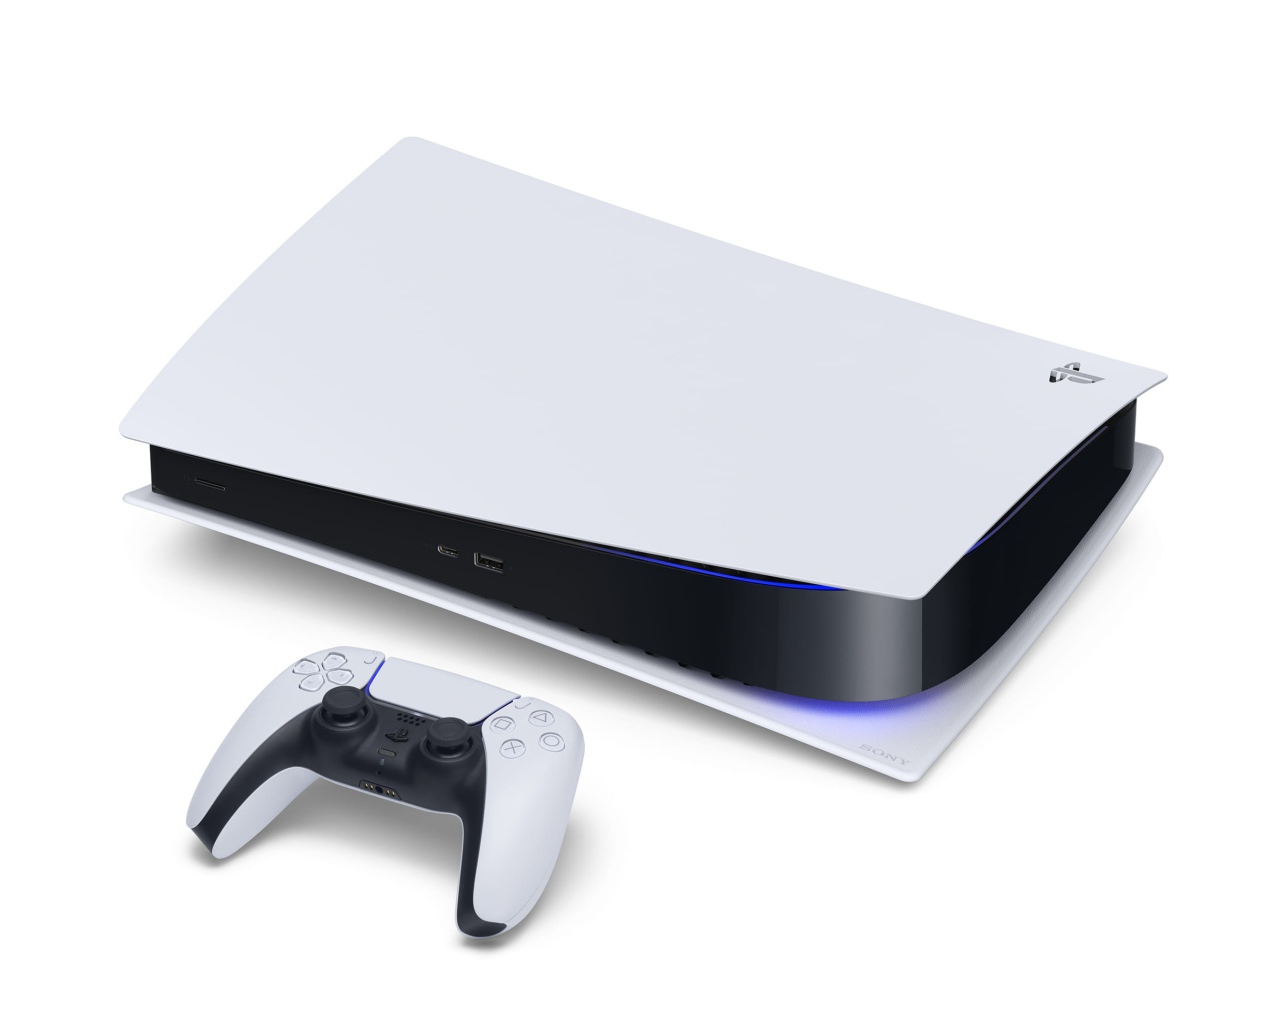 The new Sony PlayStation 5 console on a white background